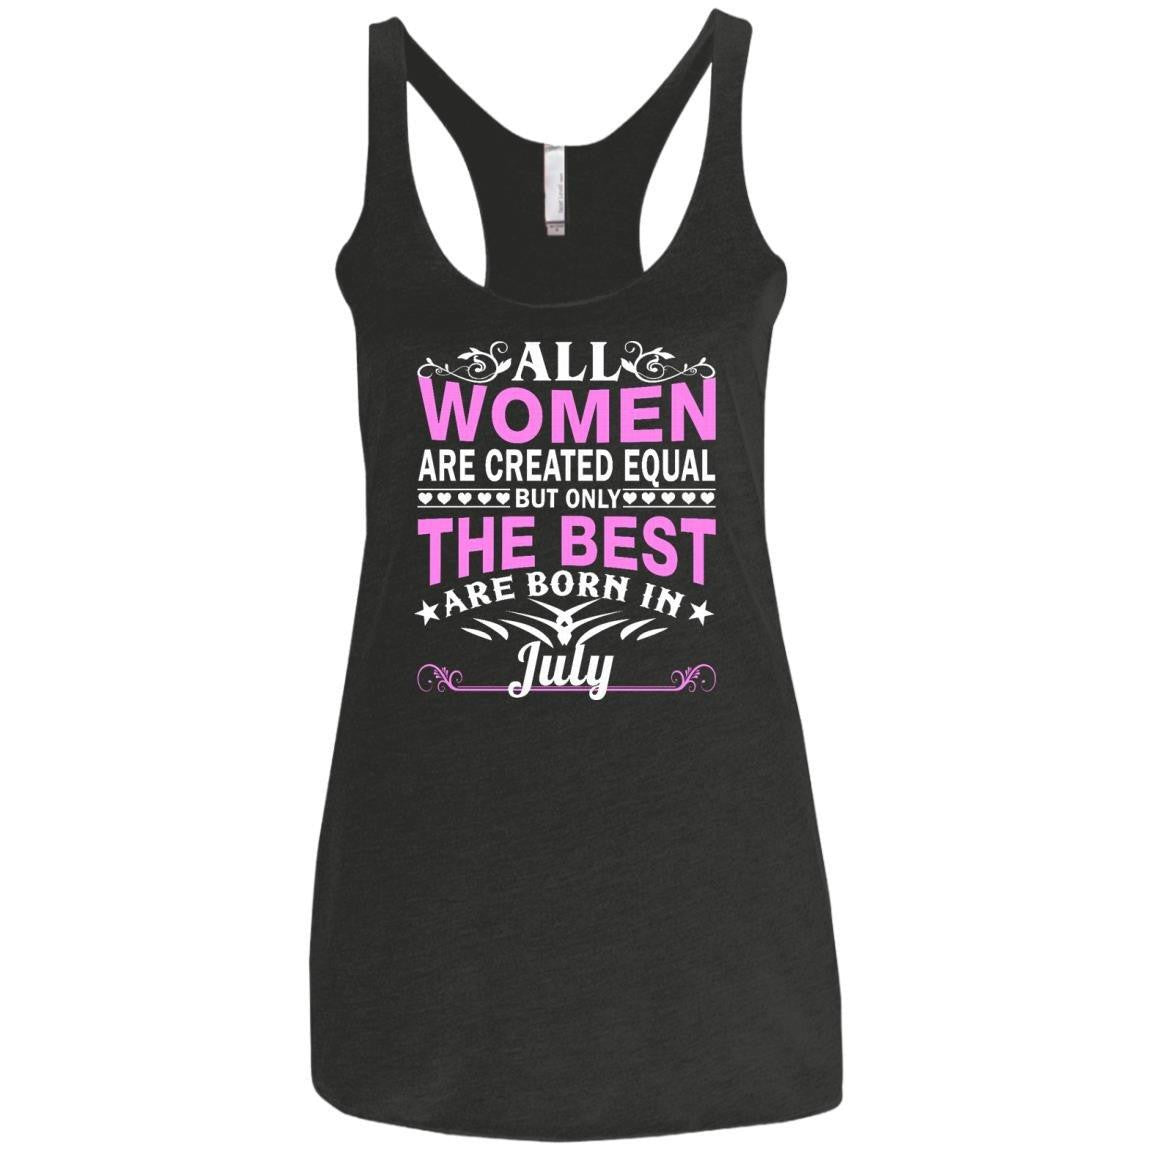 All Women Are Created Equal But Only The Best Are Born In July shirt, tank